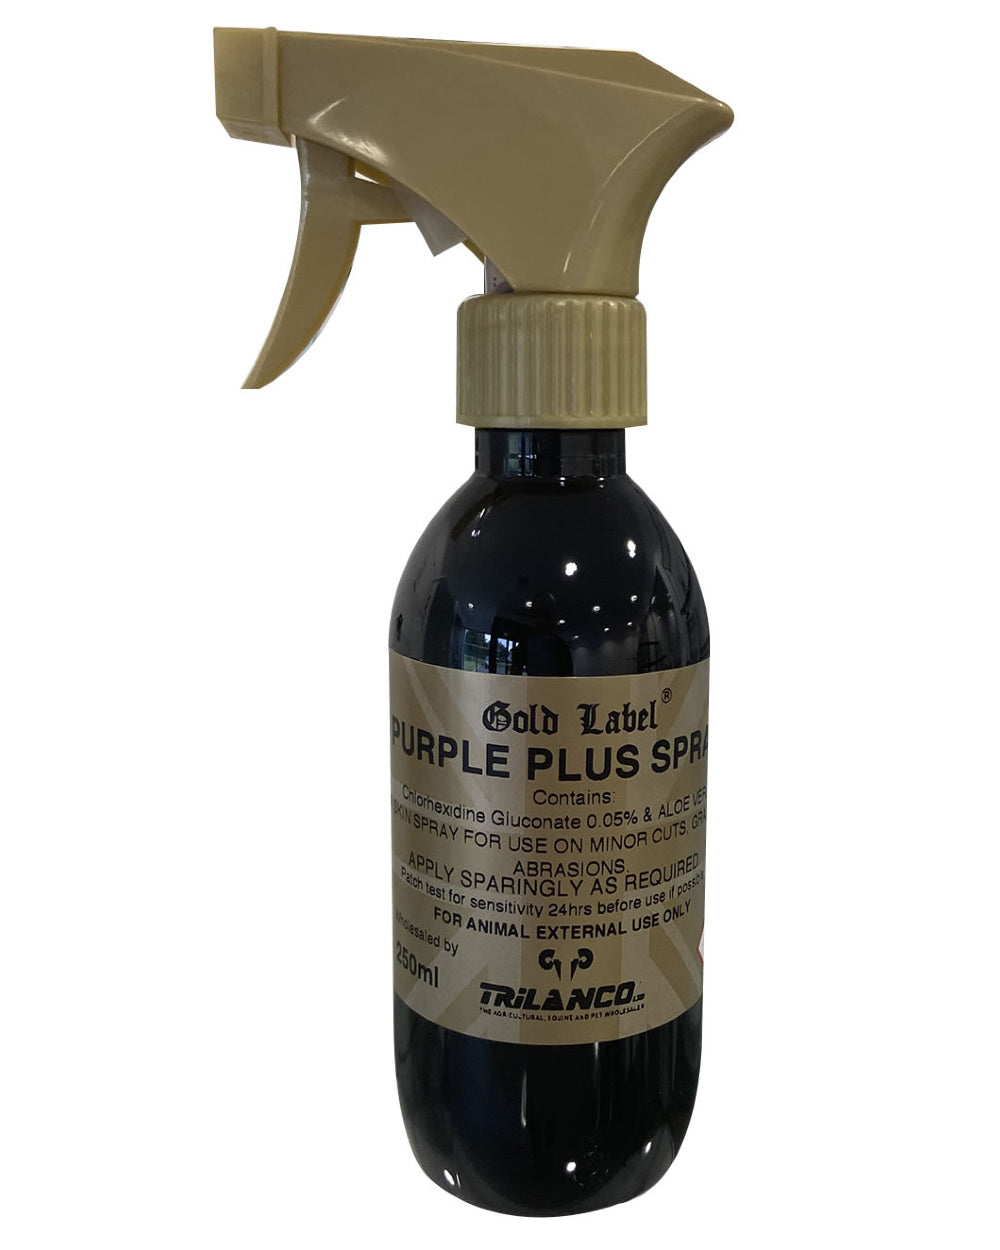 Gold Label Purple Plus Spray On A White Background